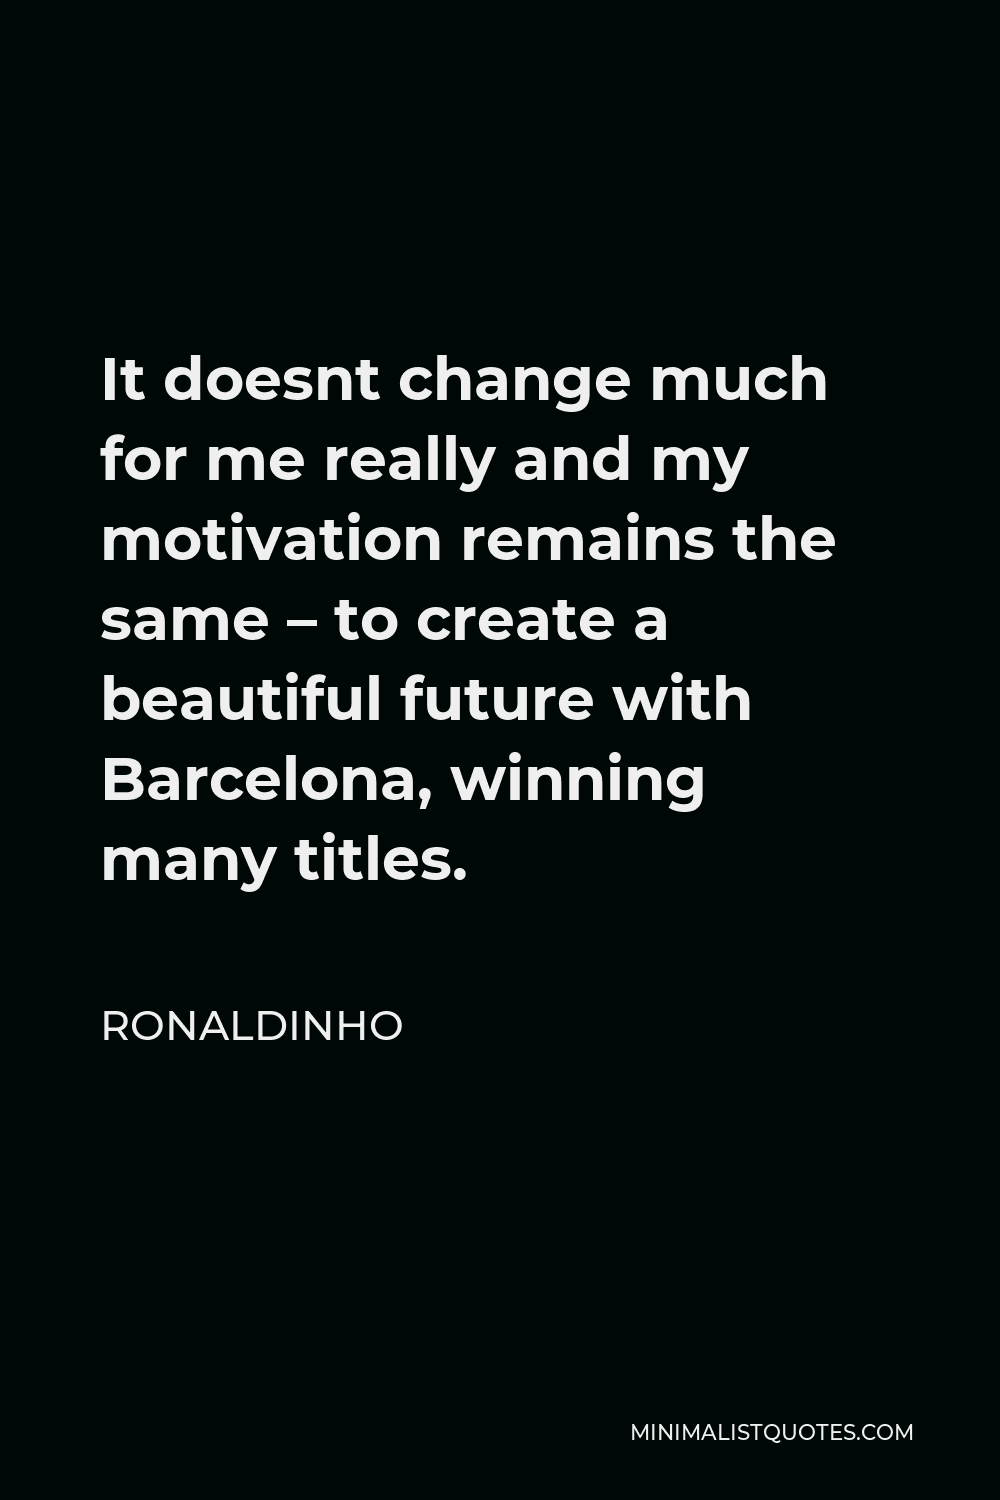 Ronaldinho Quote - It doesnt change much for me really and my motivation remains the same – to create a beautiful future with Barcelona, winning many titles.